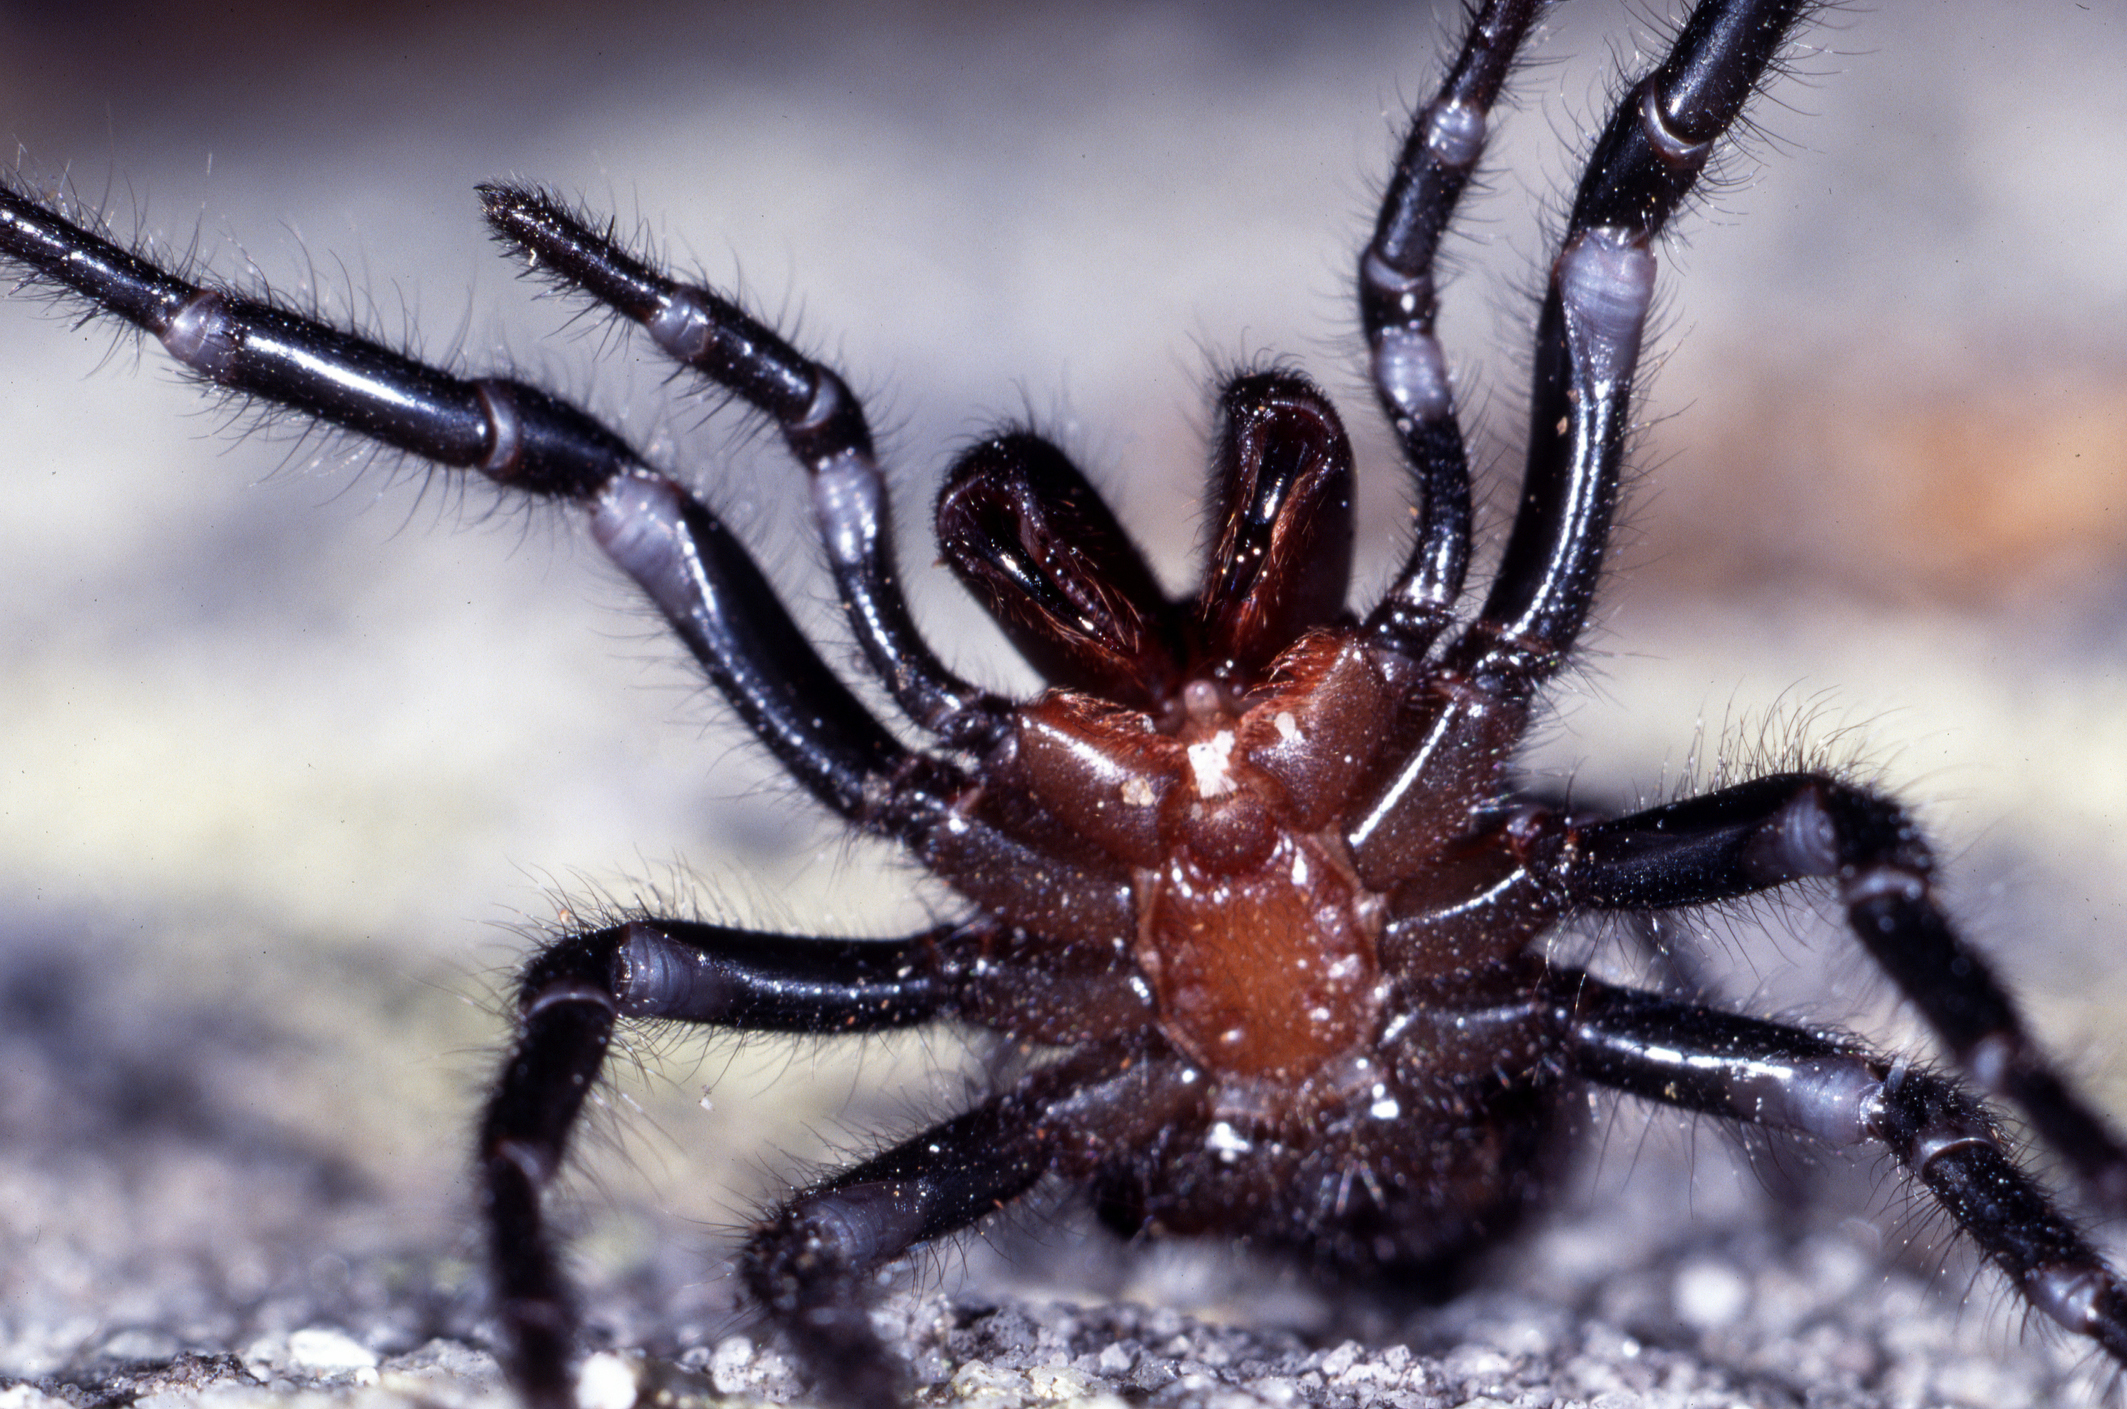 News stories about spiders are unfairly negative